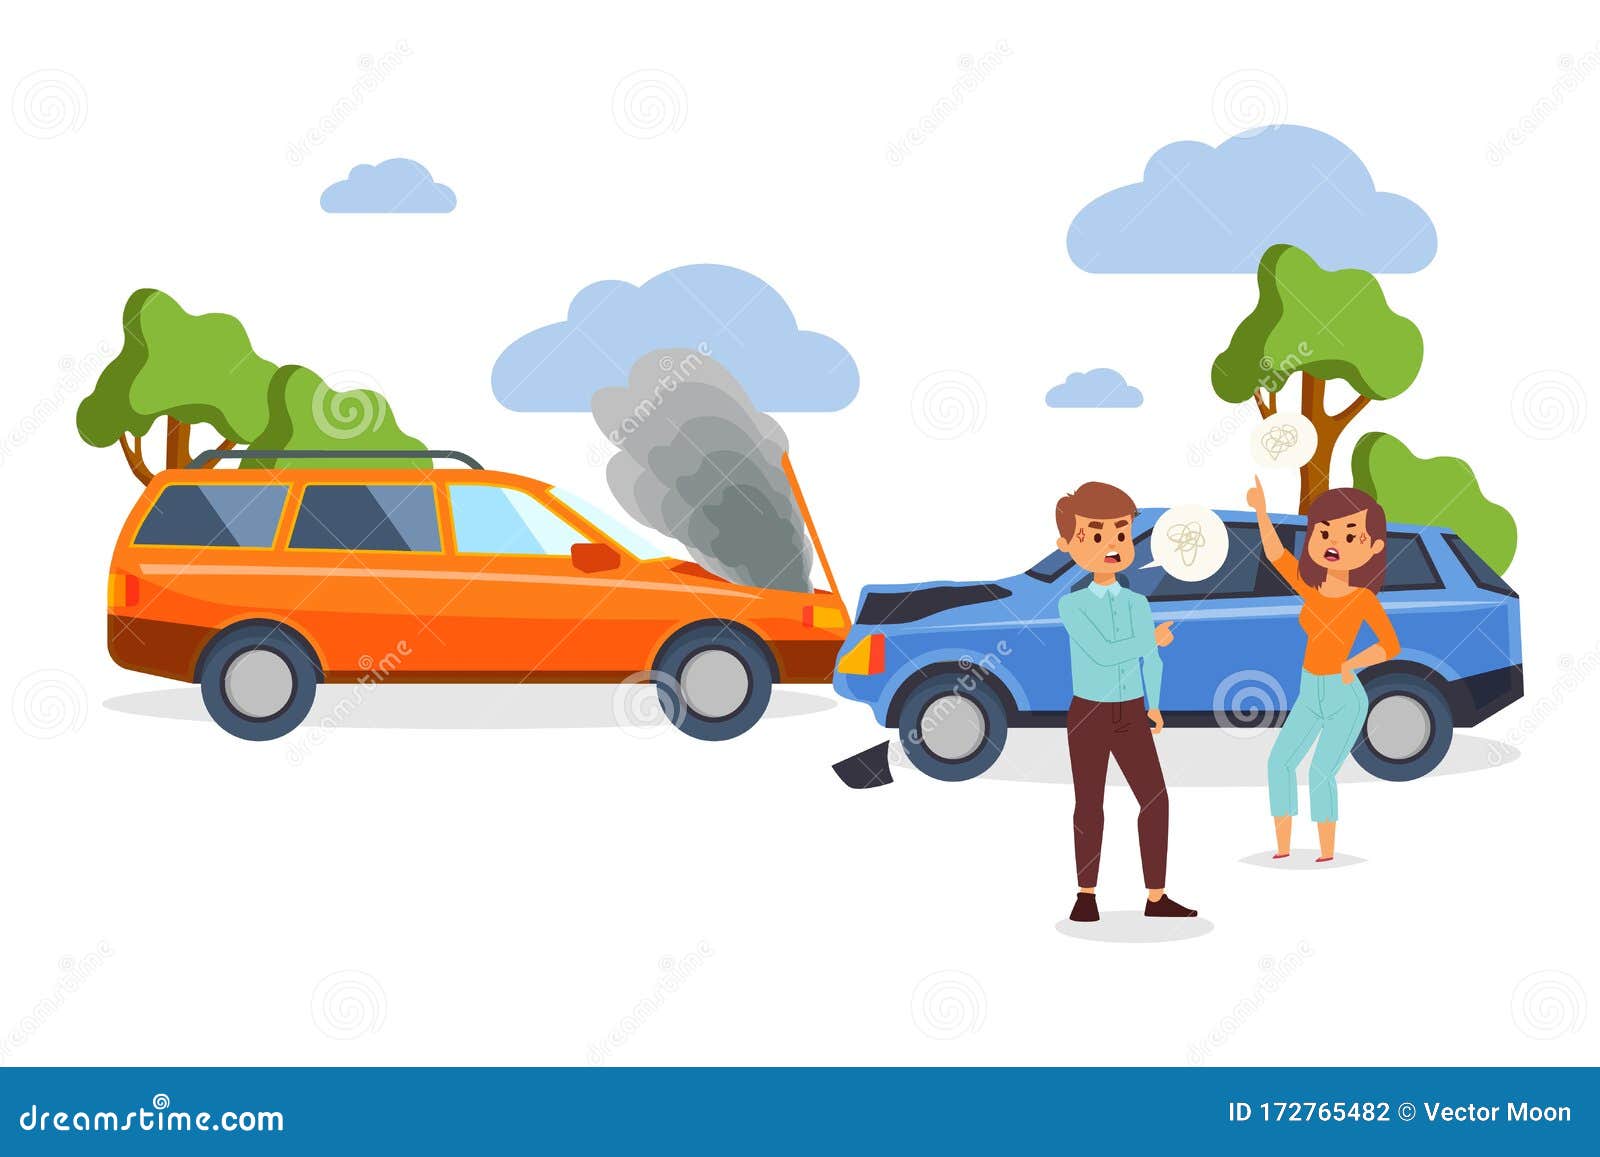 Car Crash Accident Vector Illustration with People Cartoon Characters  Having Conflict because of Vehicle Collision. Stock Vector - Illustration  of broken, male: 172765482